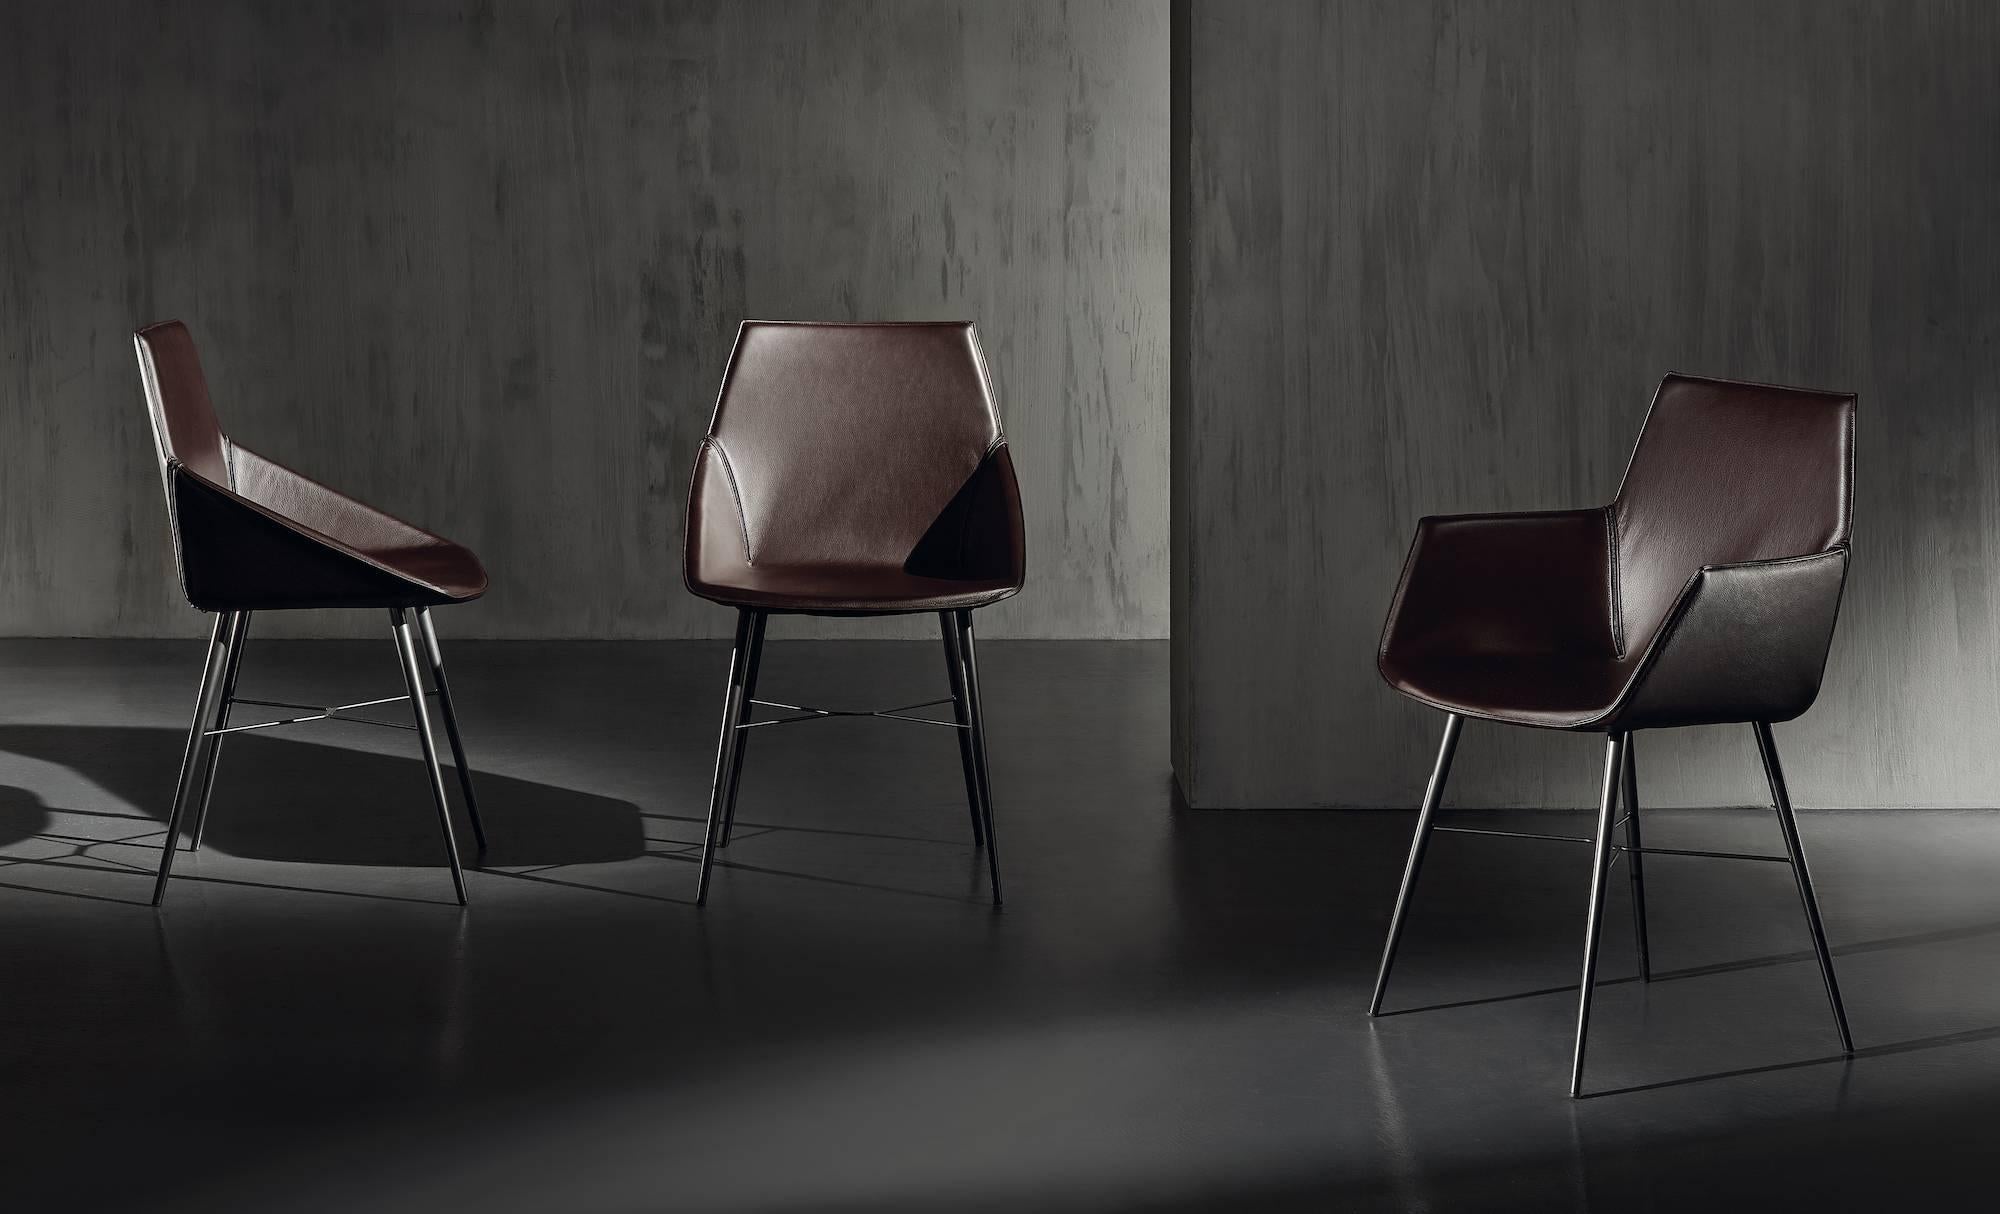 A contemporary leather seat of minimal design and elegant proportions, with a chrome-plated or burnished metal base. Chair with thermo-folded shell, particularly light, flexible and comfortable, completely coated with fabric, felt or leather. The